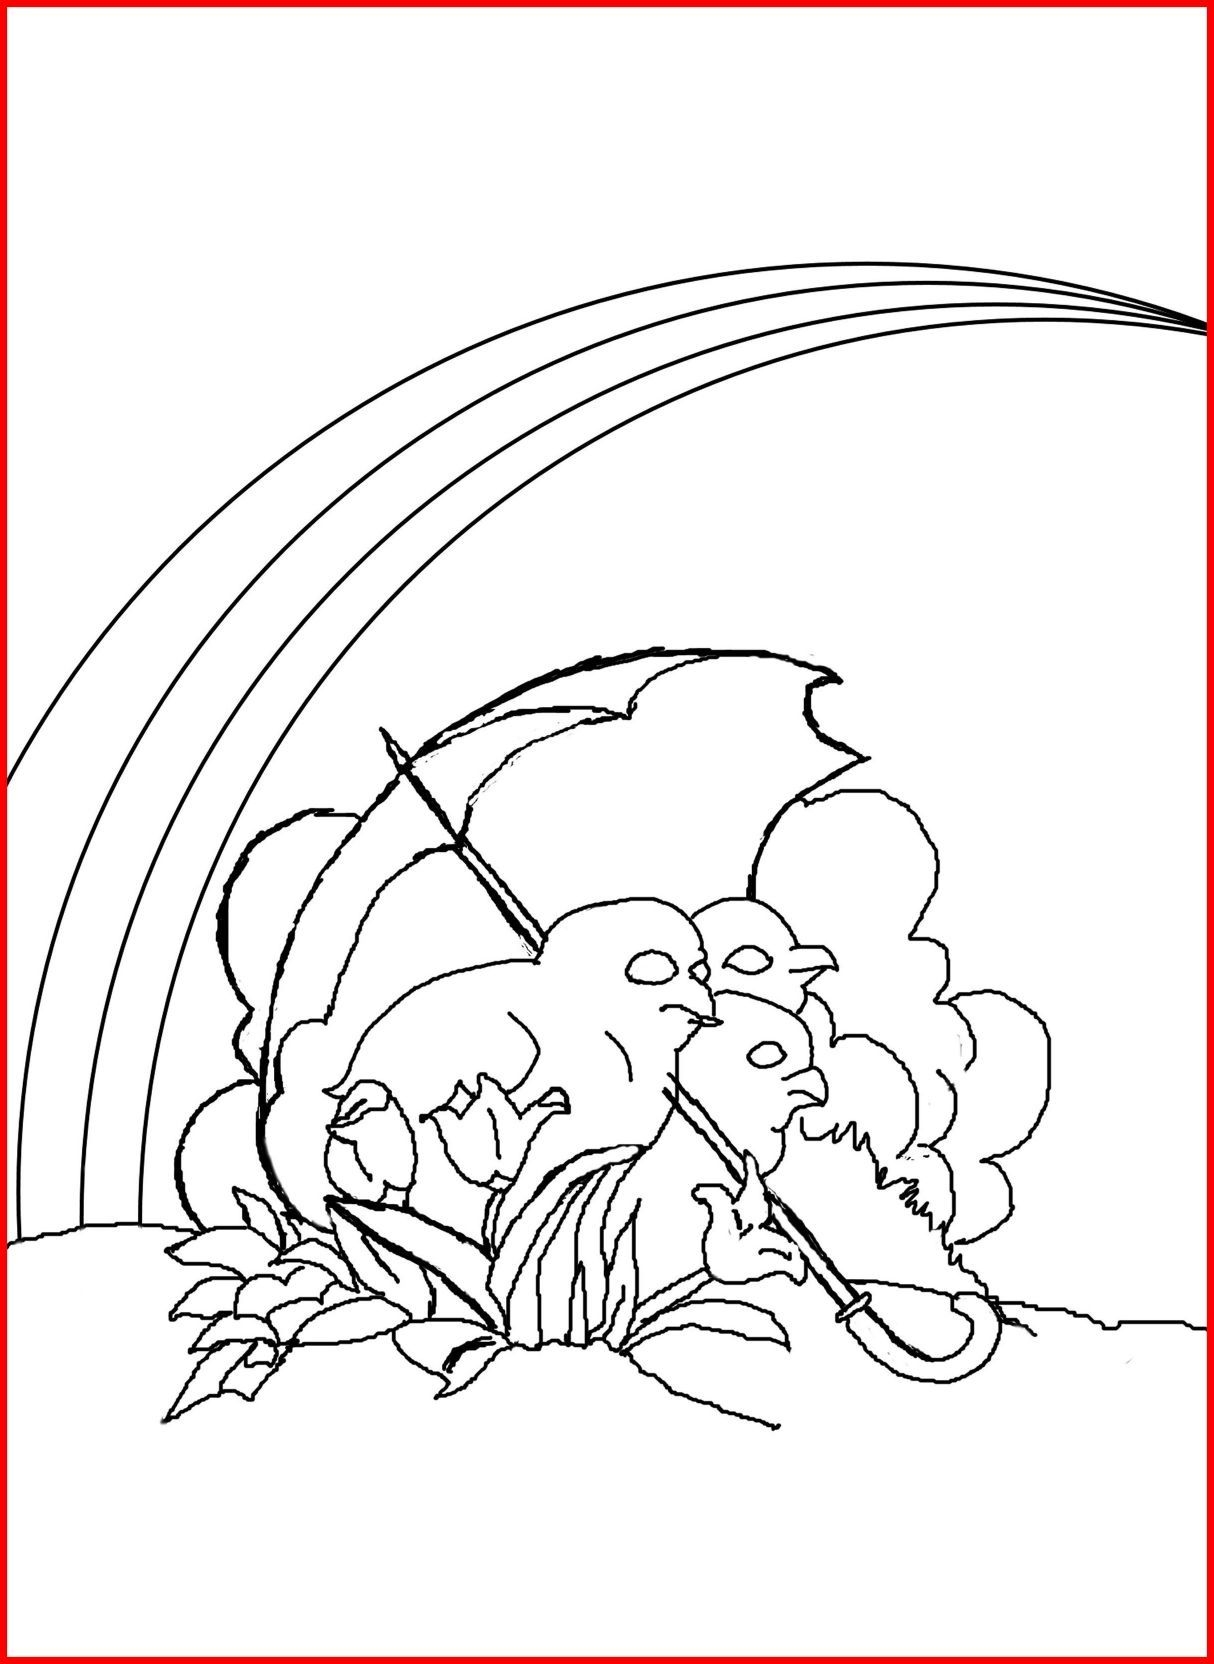 Rainbow Coloring Pages For Adults at GetColorings.com | Free printable